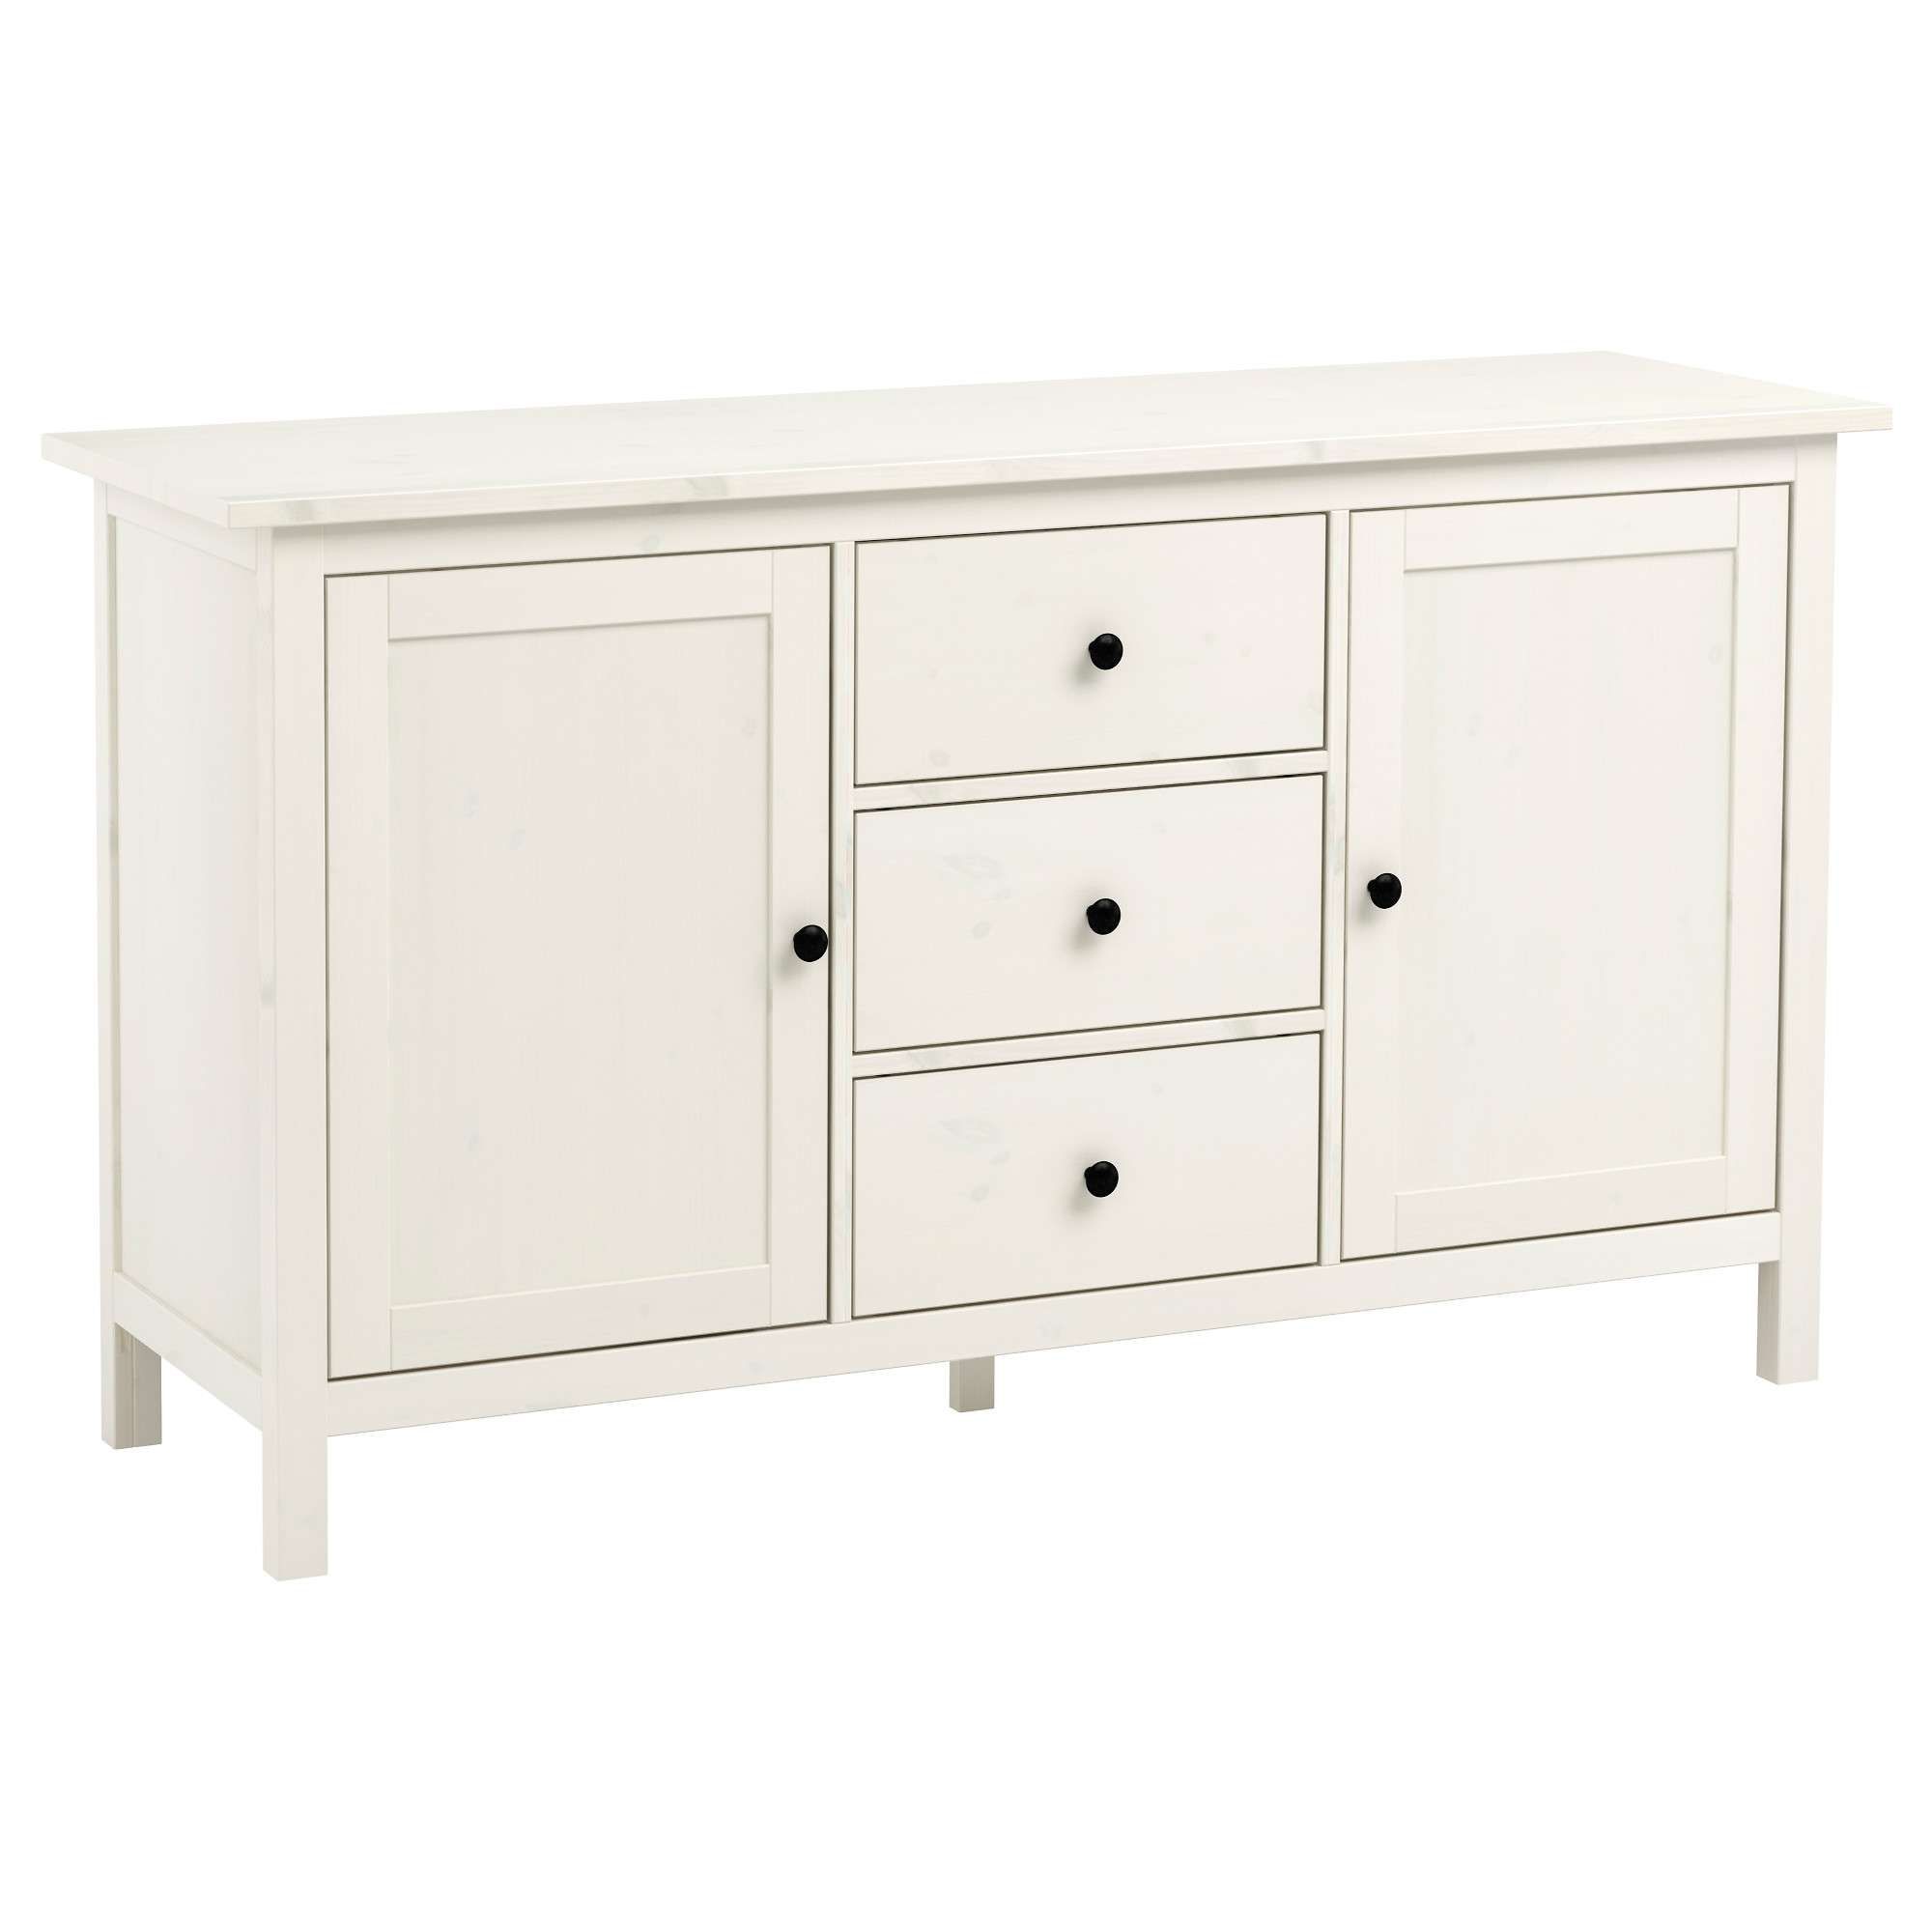 Hemnes Sideboard – White Stain – Ikea With Regard To Extra Deep Sideboards (View 15 of 20)